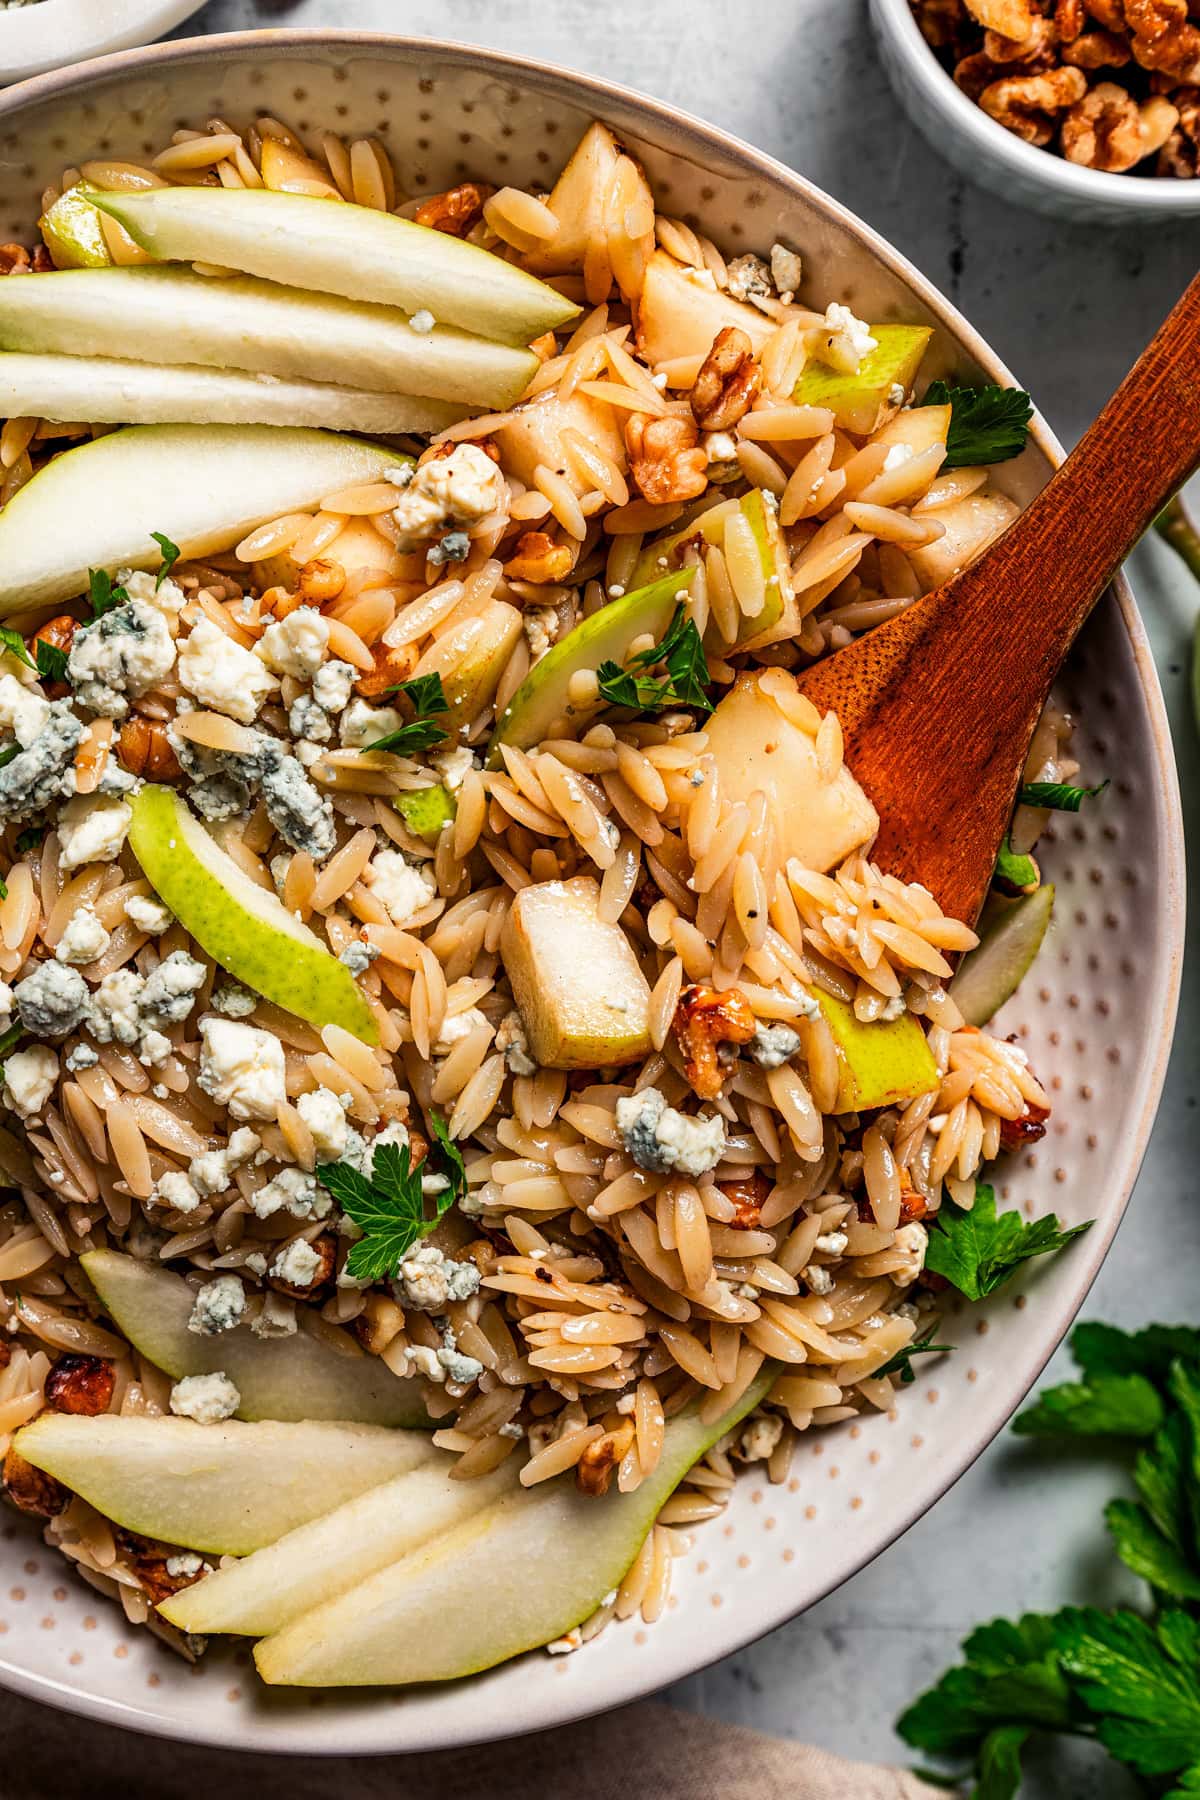 Orzo in a bowl and garnished with sliced pears, chopped nuts, and cheese.